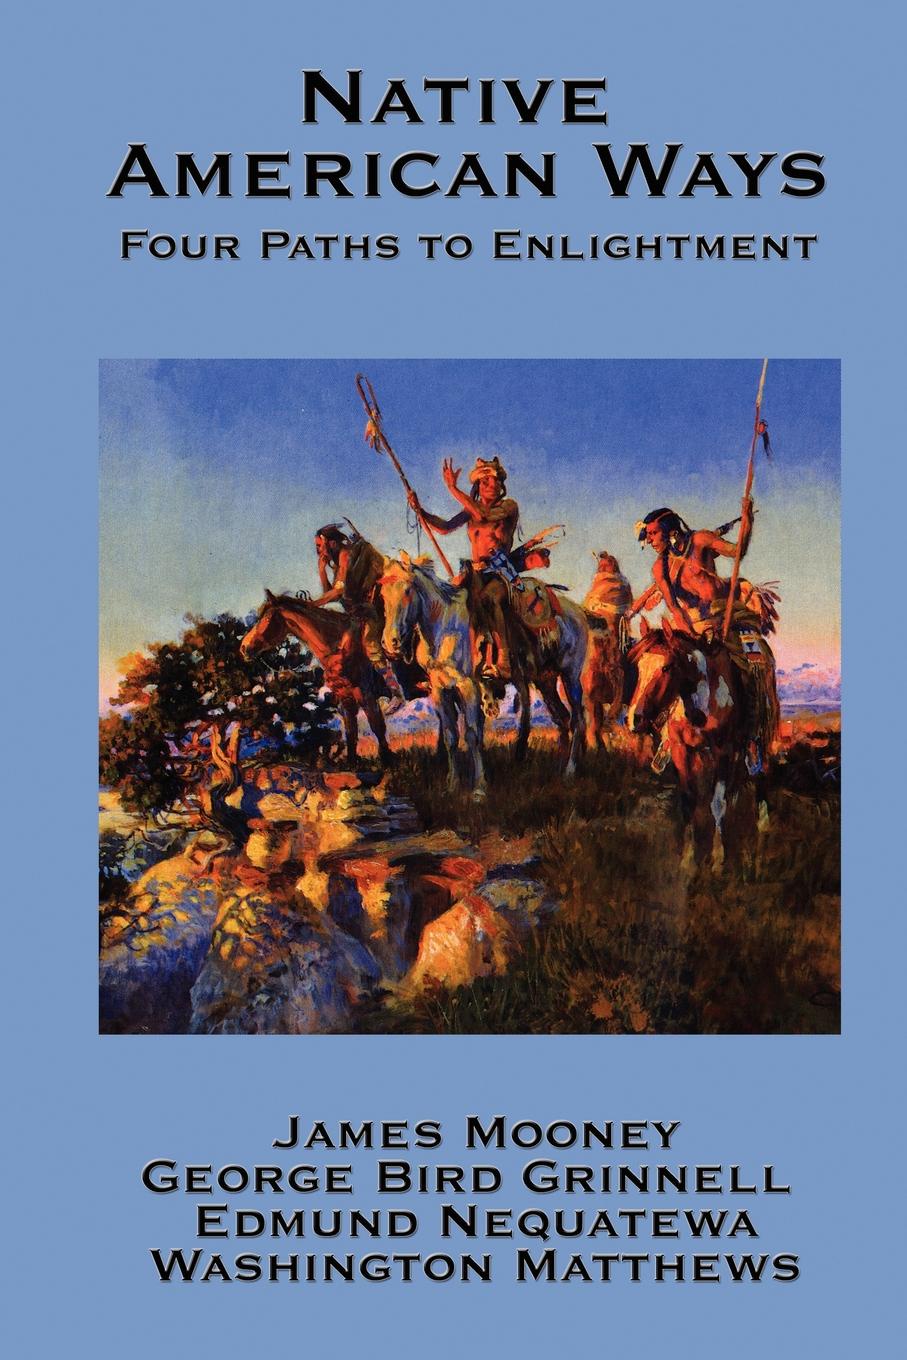 Native American Ways. Four Paths to Enlightenment